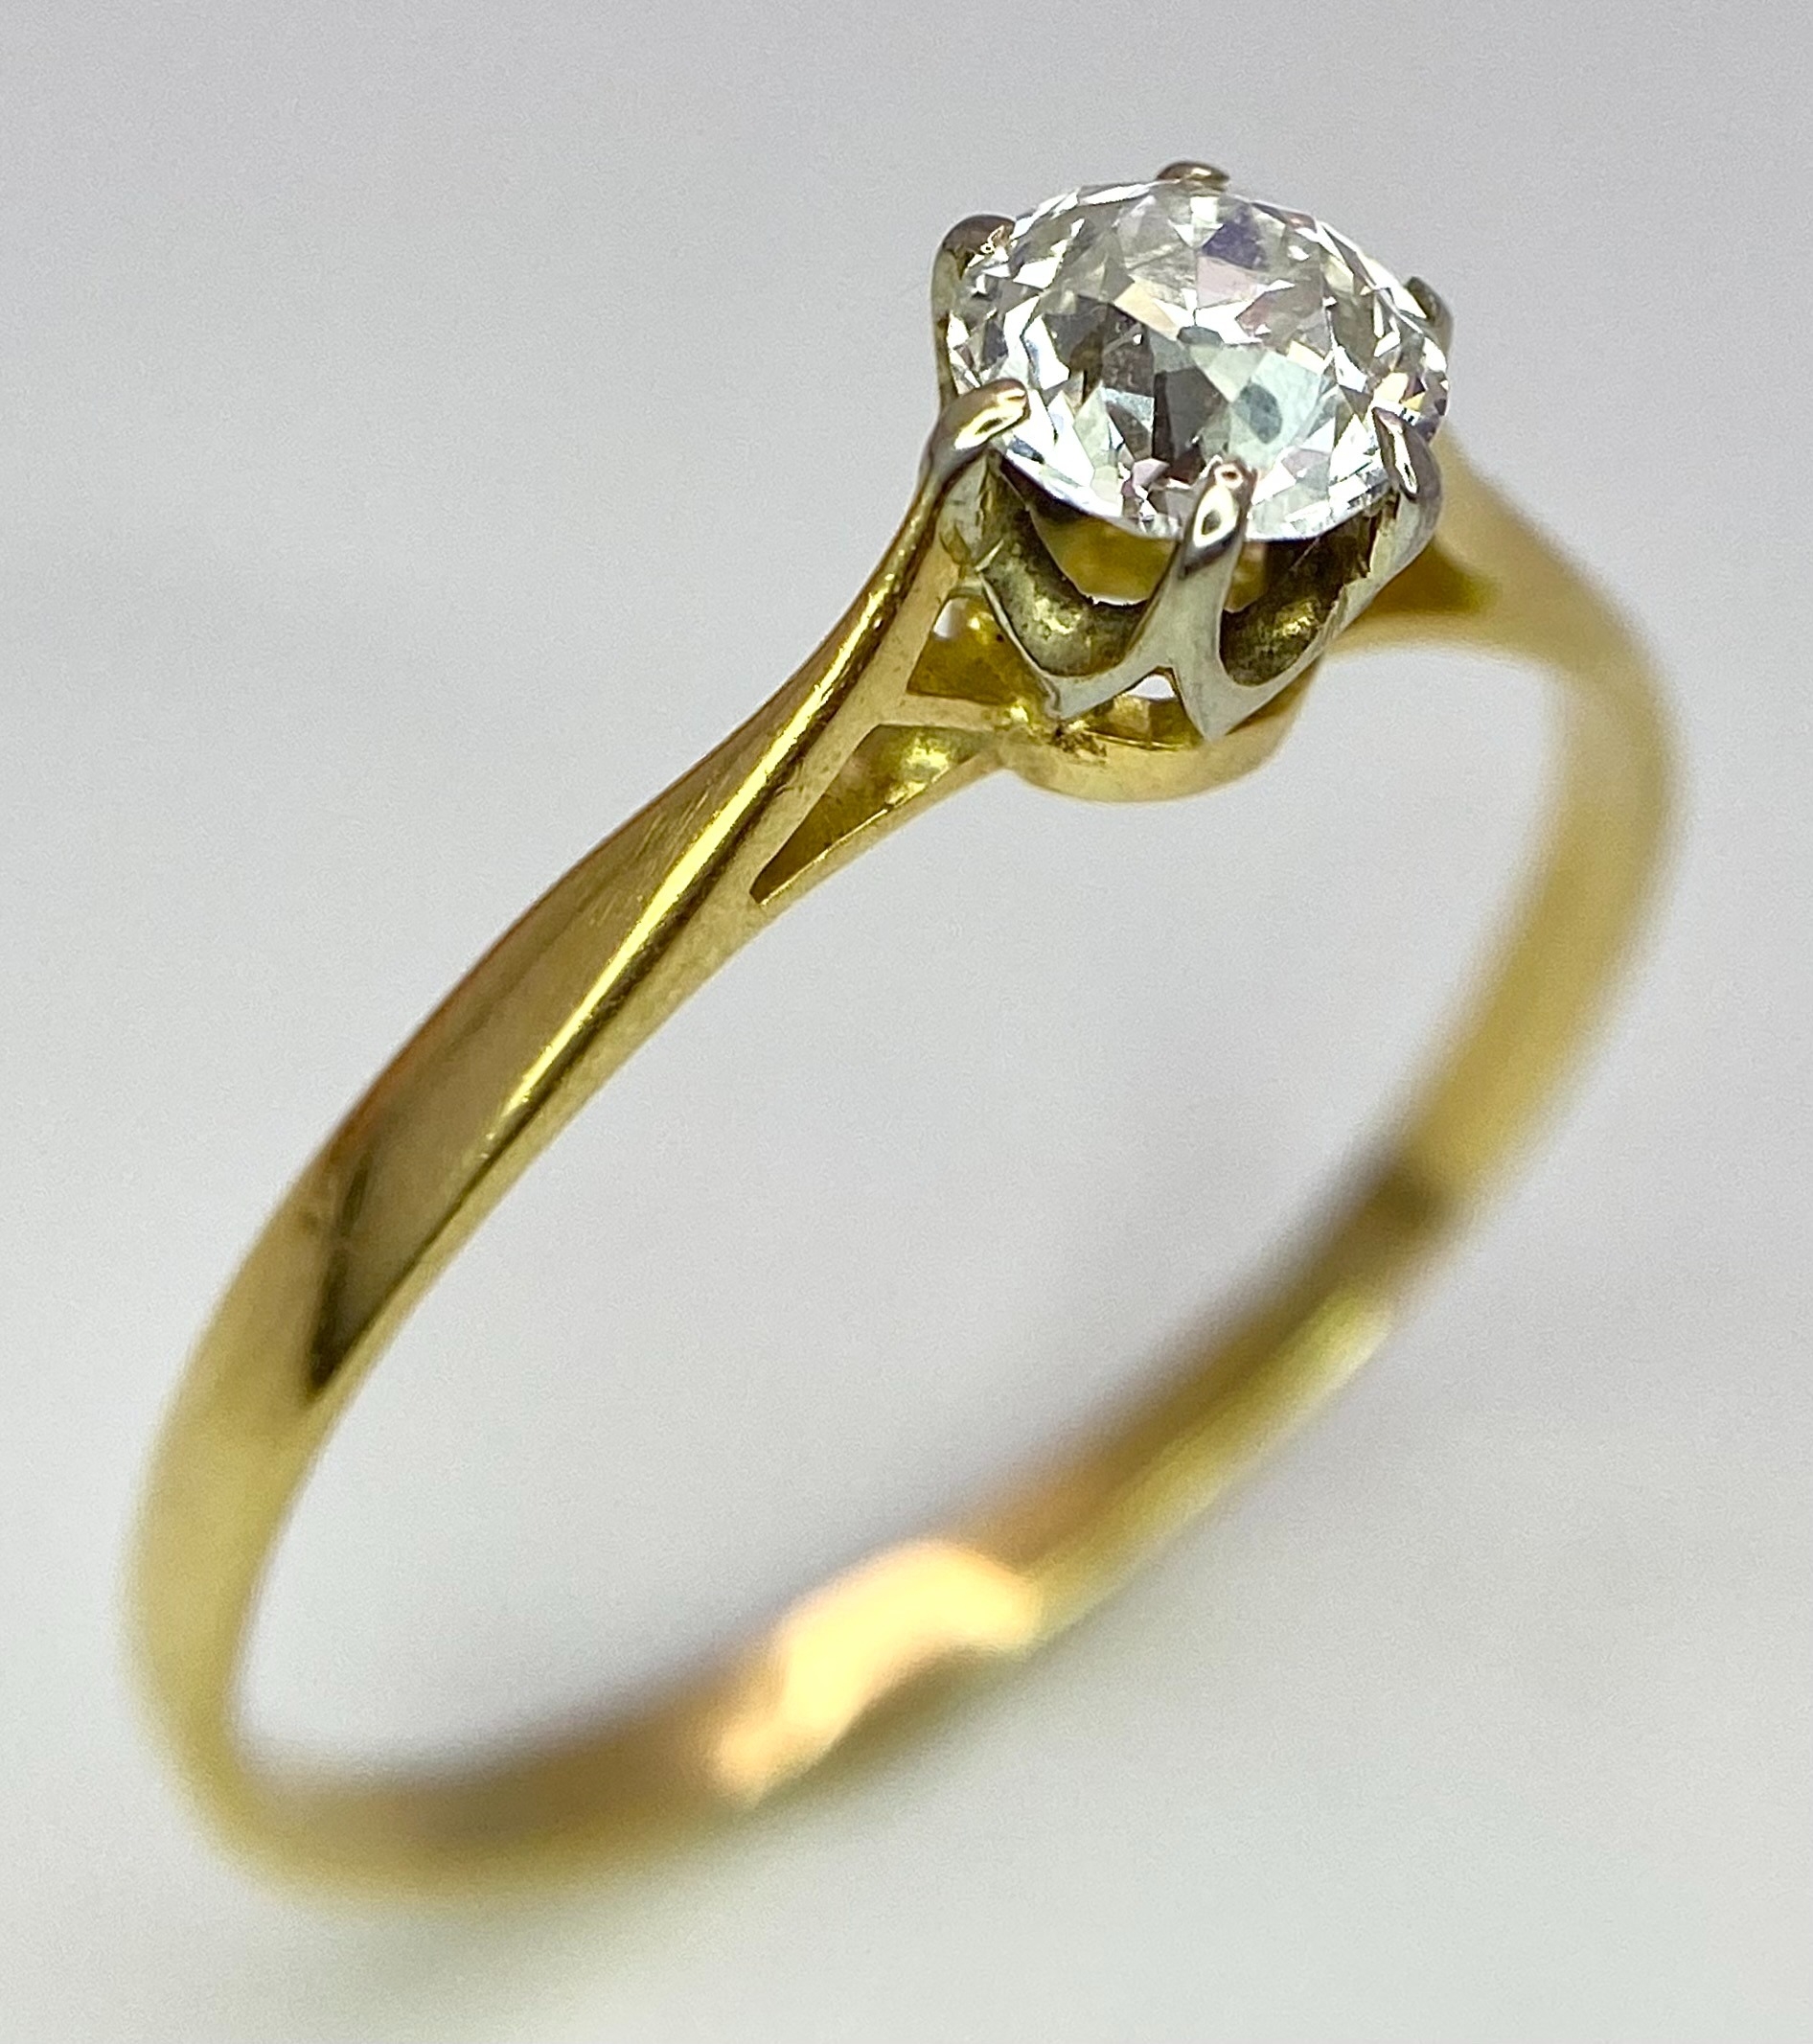 AN 18K YELLOW GOLD, OLD CUT DIAMOND SOLITAIRE RING. 0.40CT. 1.5G. SIZE P 1/2. - Image 3 of 5